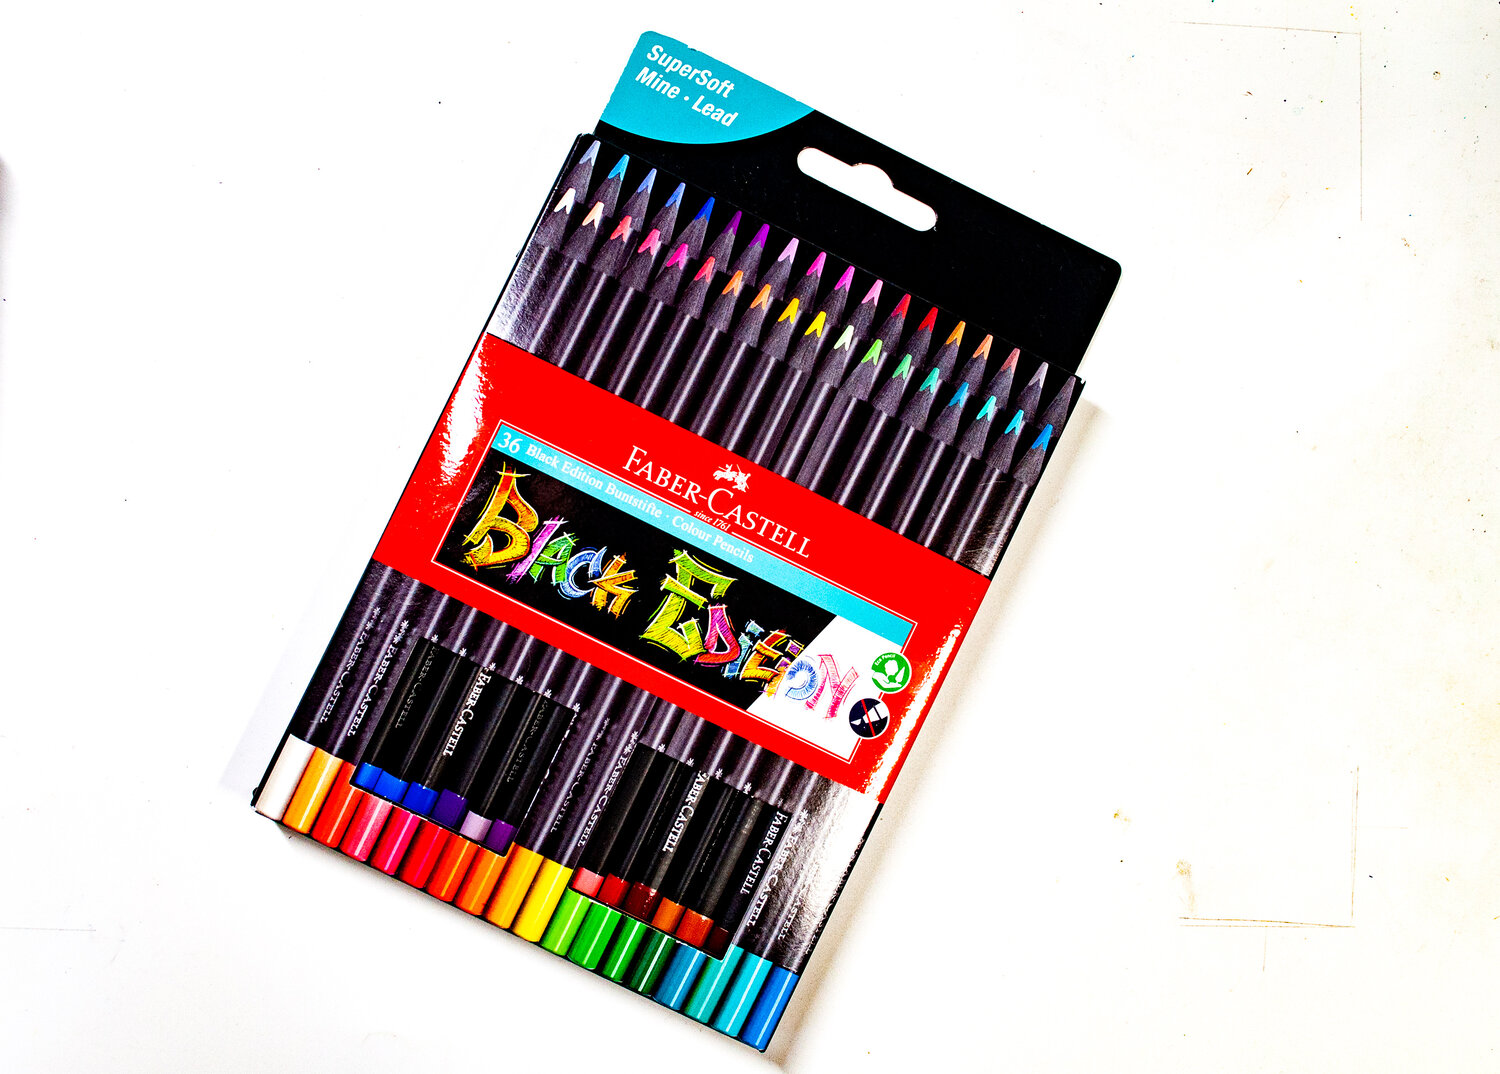 NEW Faber-Castell BLACK EDITION Colored Pencils [Unboxing & Review